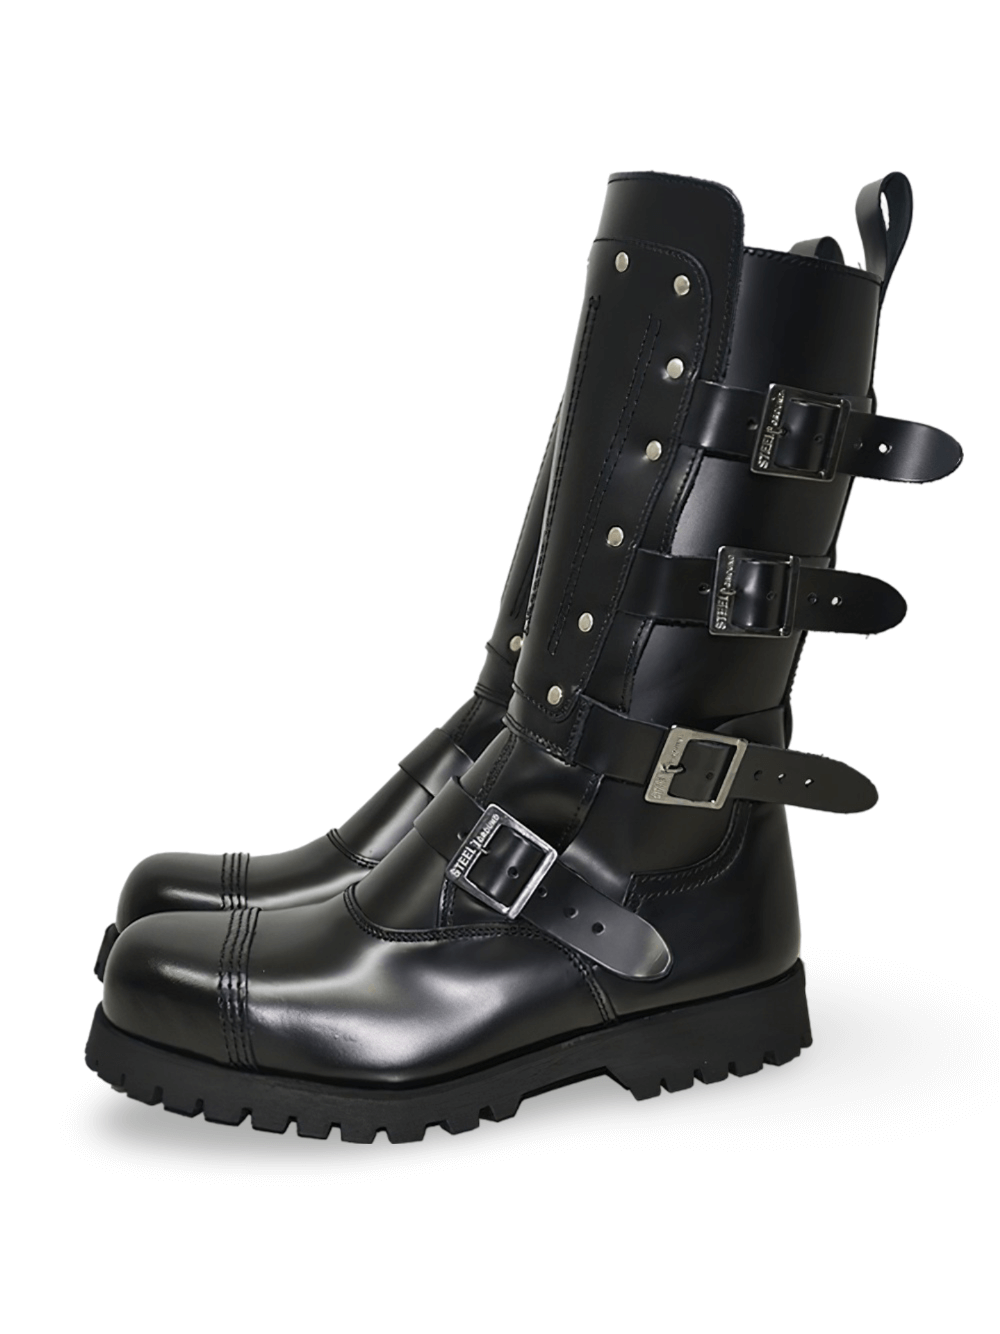 Black Rugged Steel Cap Leather Boots with Buckles